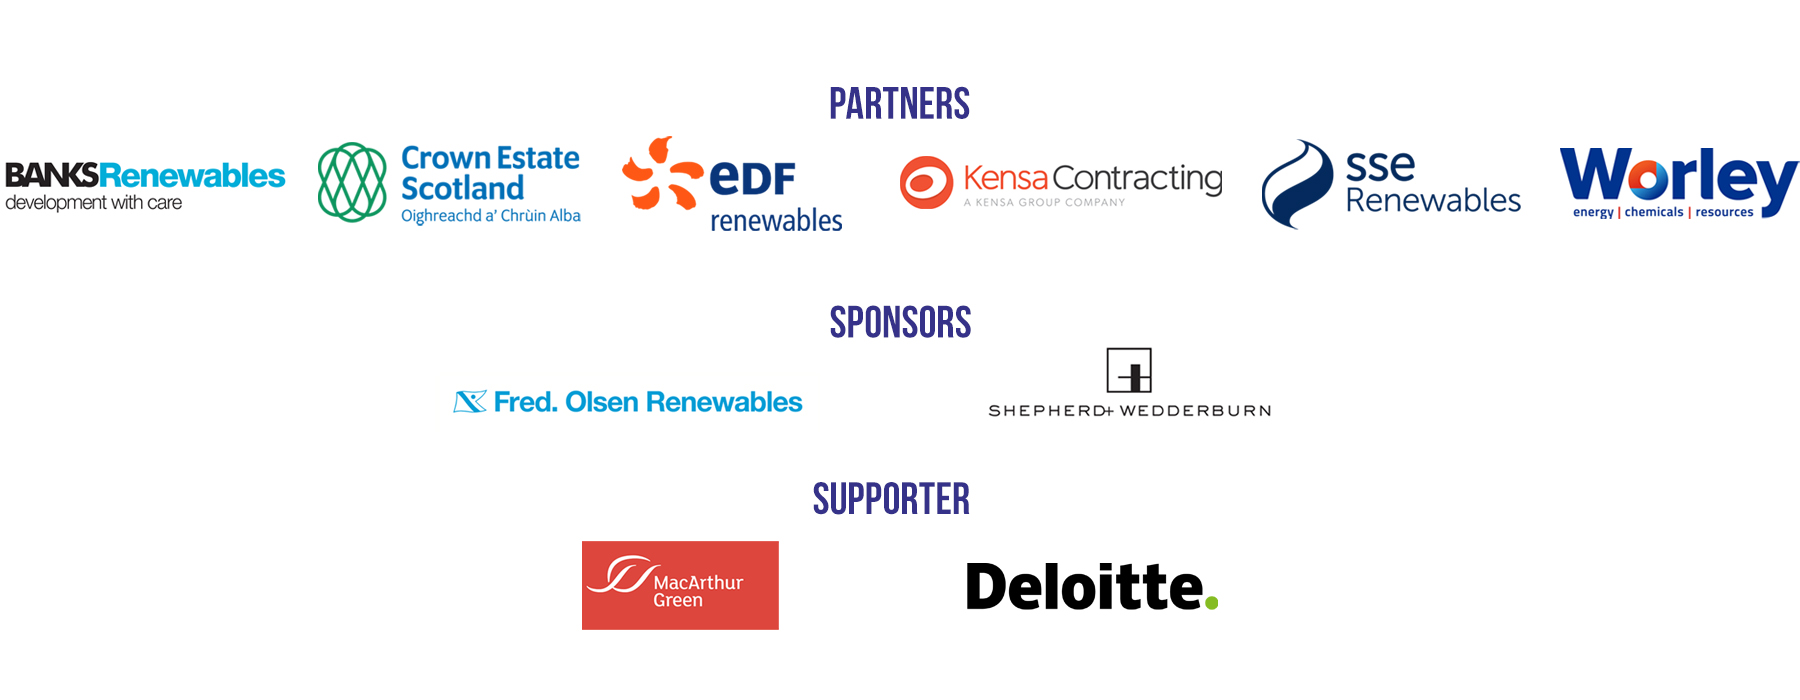 COP26 Partners/Sponsors/Supporters August 2021